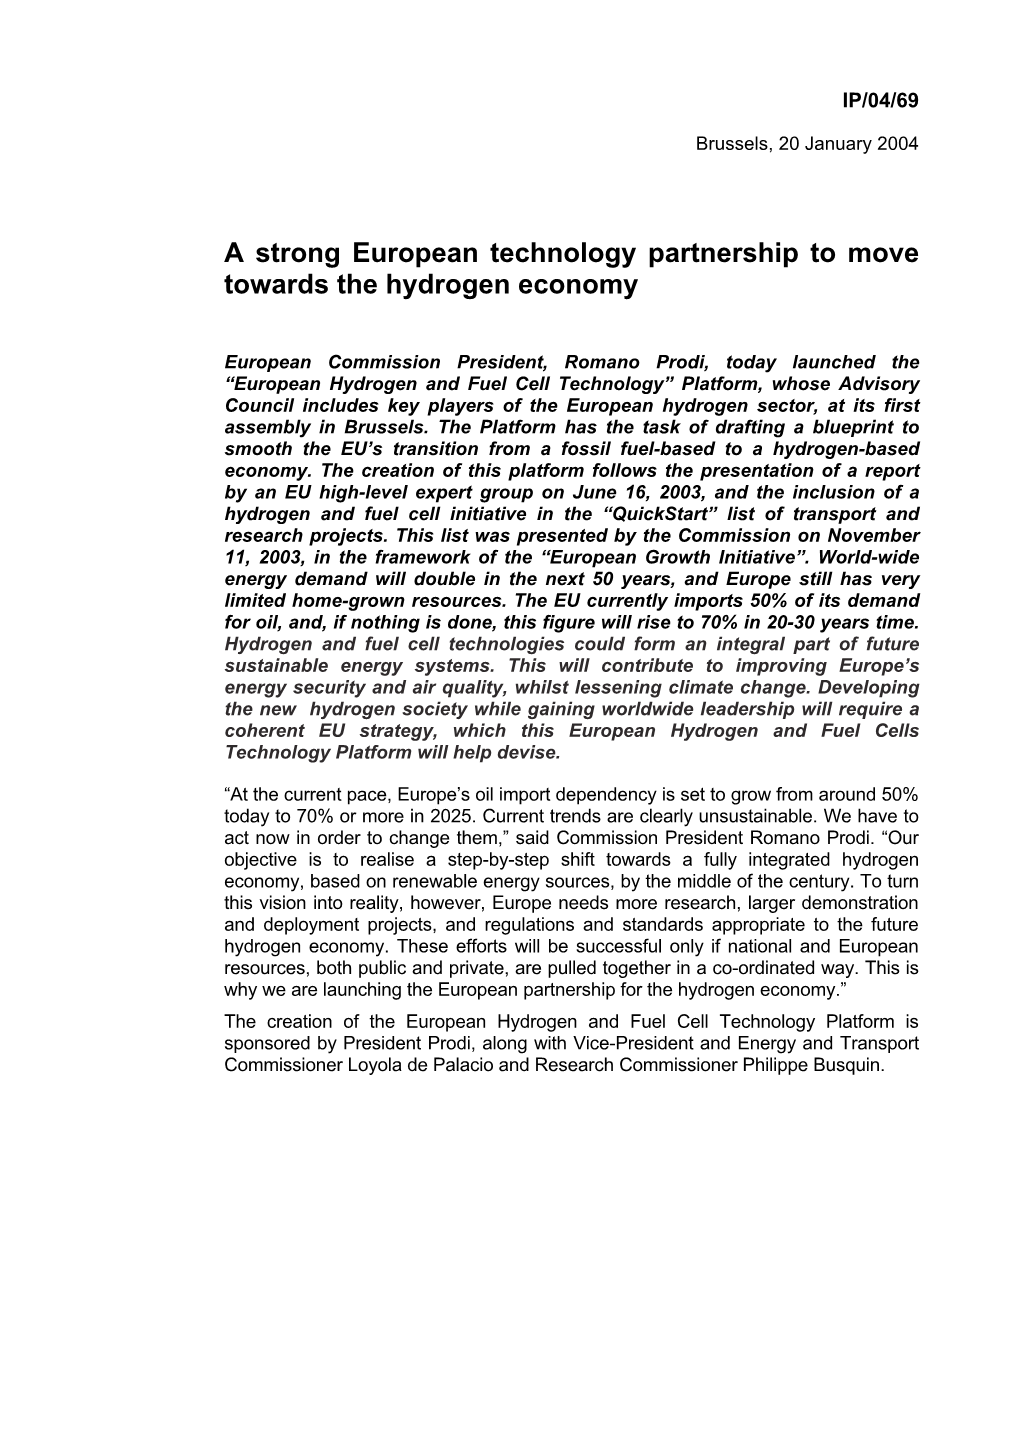 A Strong European Technology Partnership to Move Towards the Hydrogen Economy